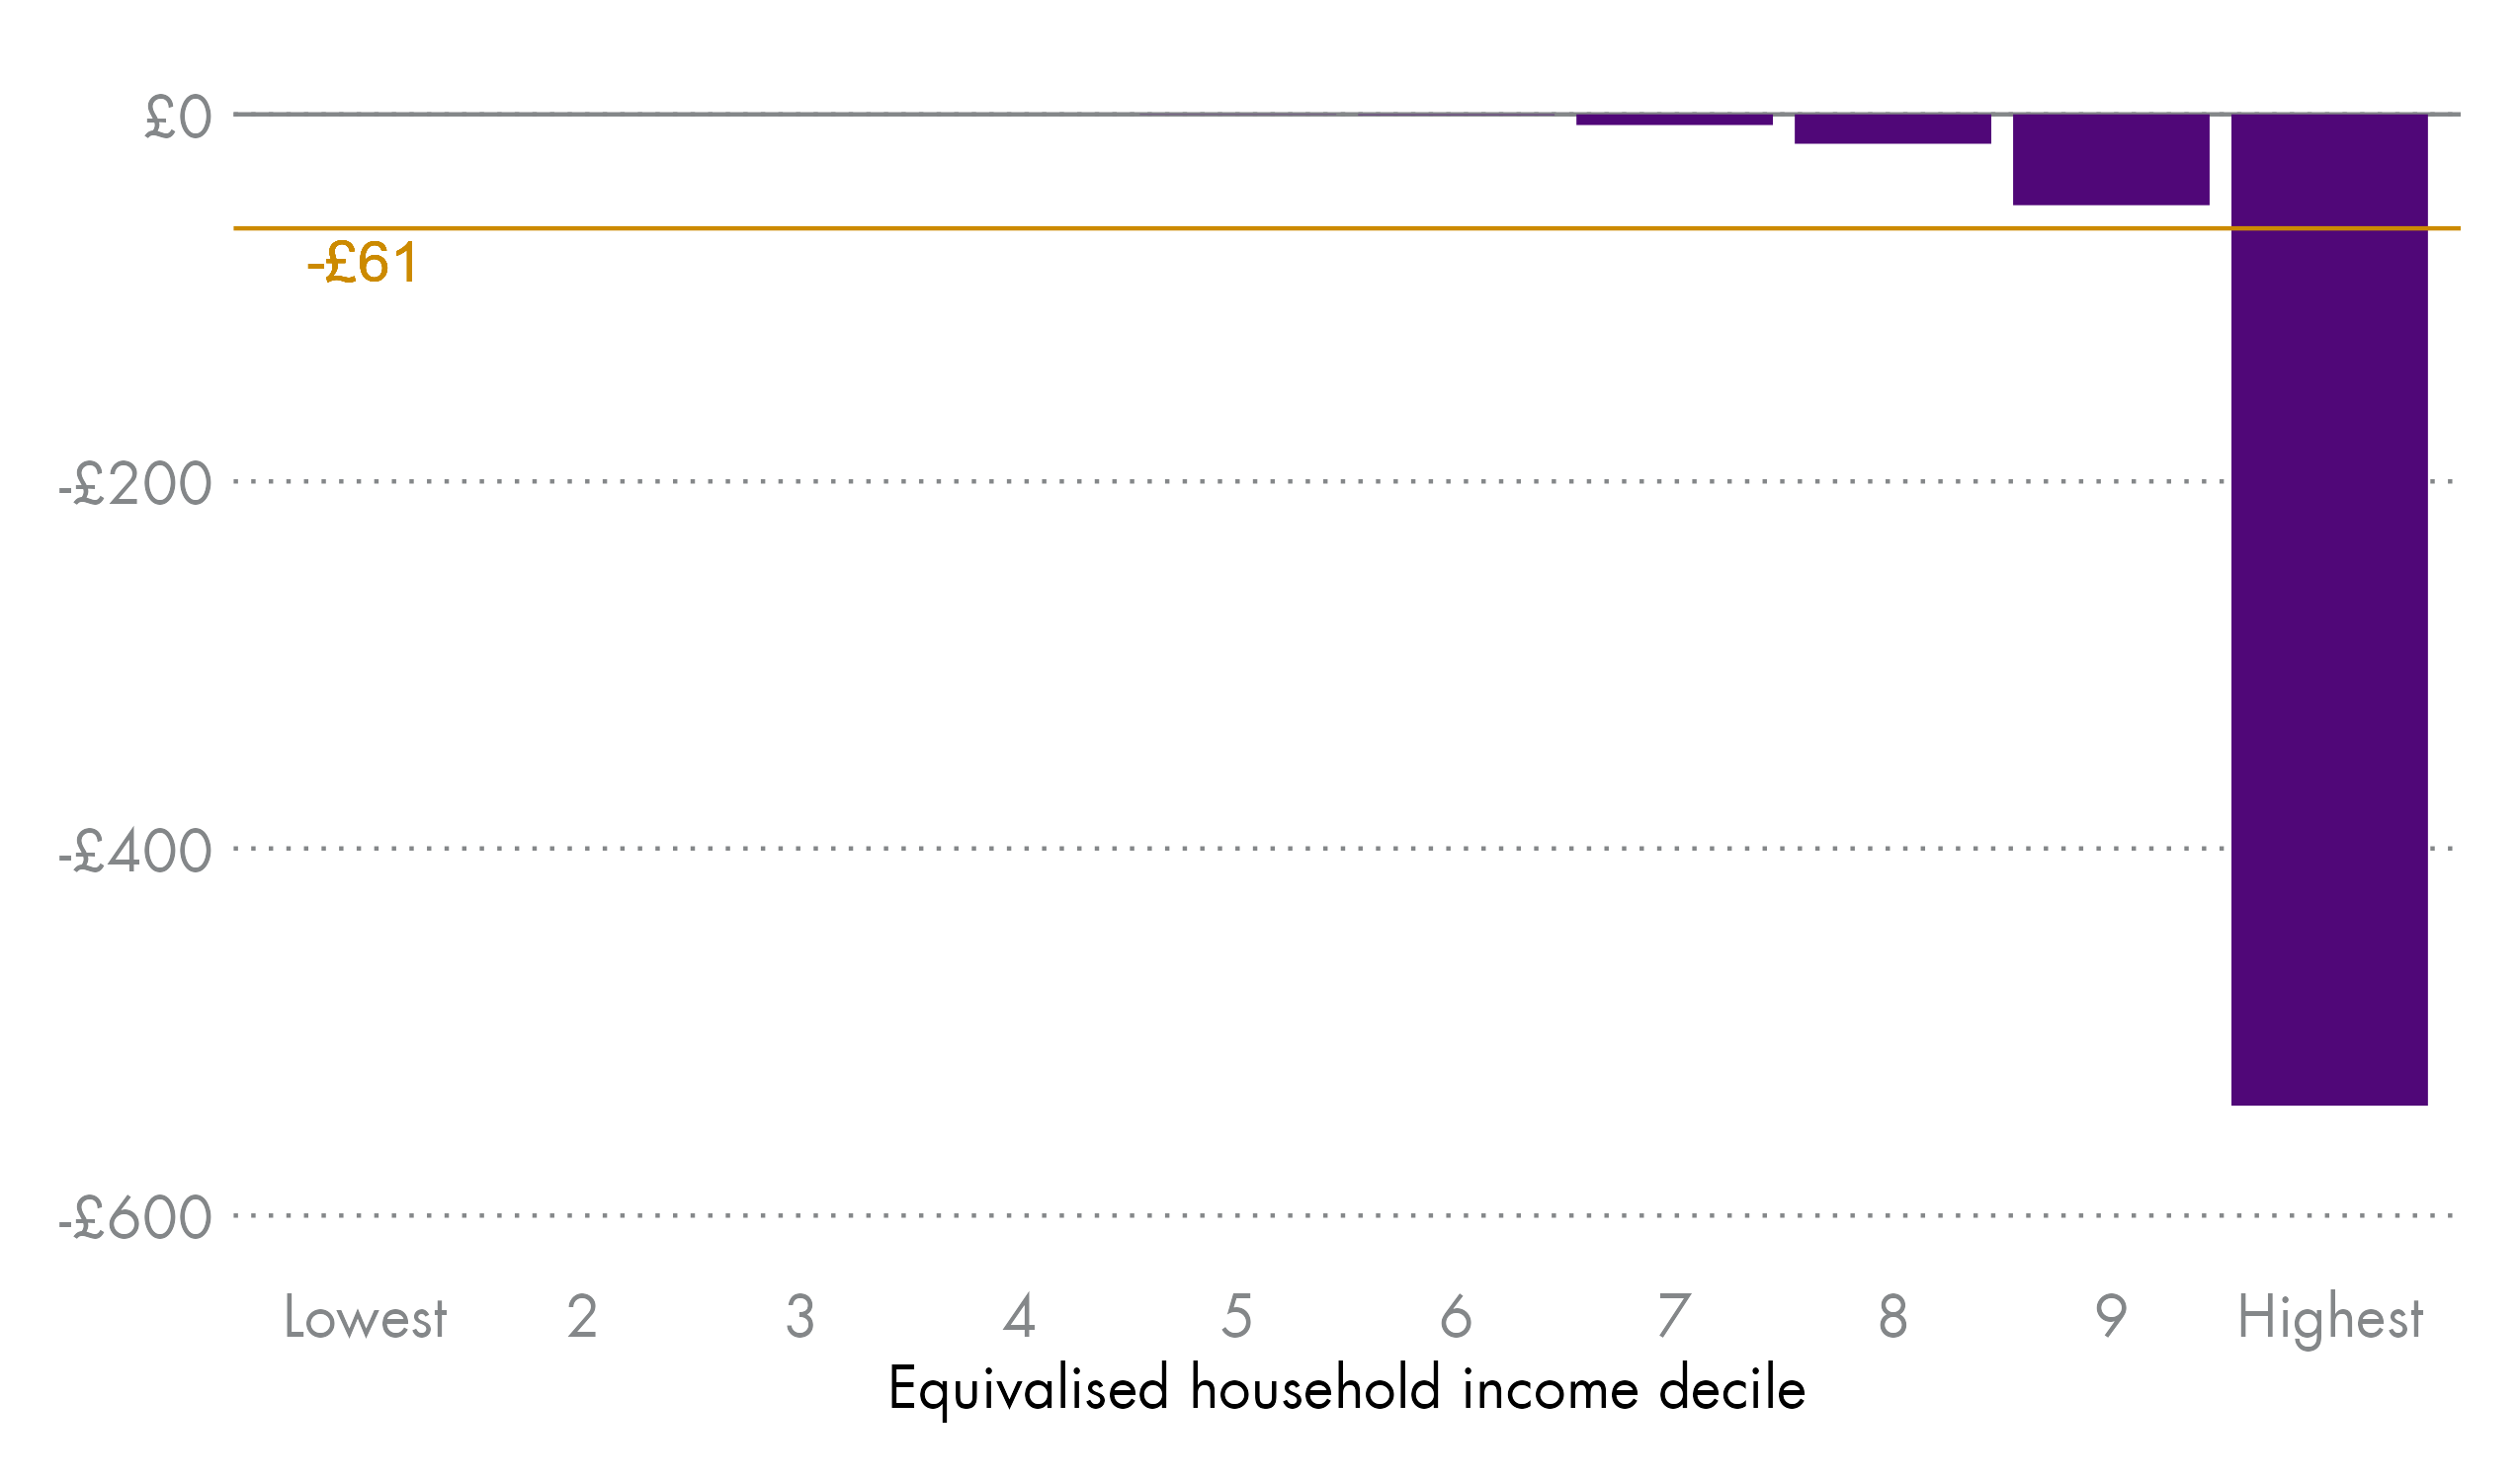 Chart showing impact of income tax changes for households at different points on the income distribution. The proposed income tax changes have the biggest impact on households at the top end of the income distribution. For the richest 10% of households, income is reduced by £540 per year, compared to an average of £61 per year across all households.